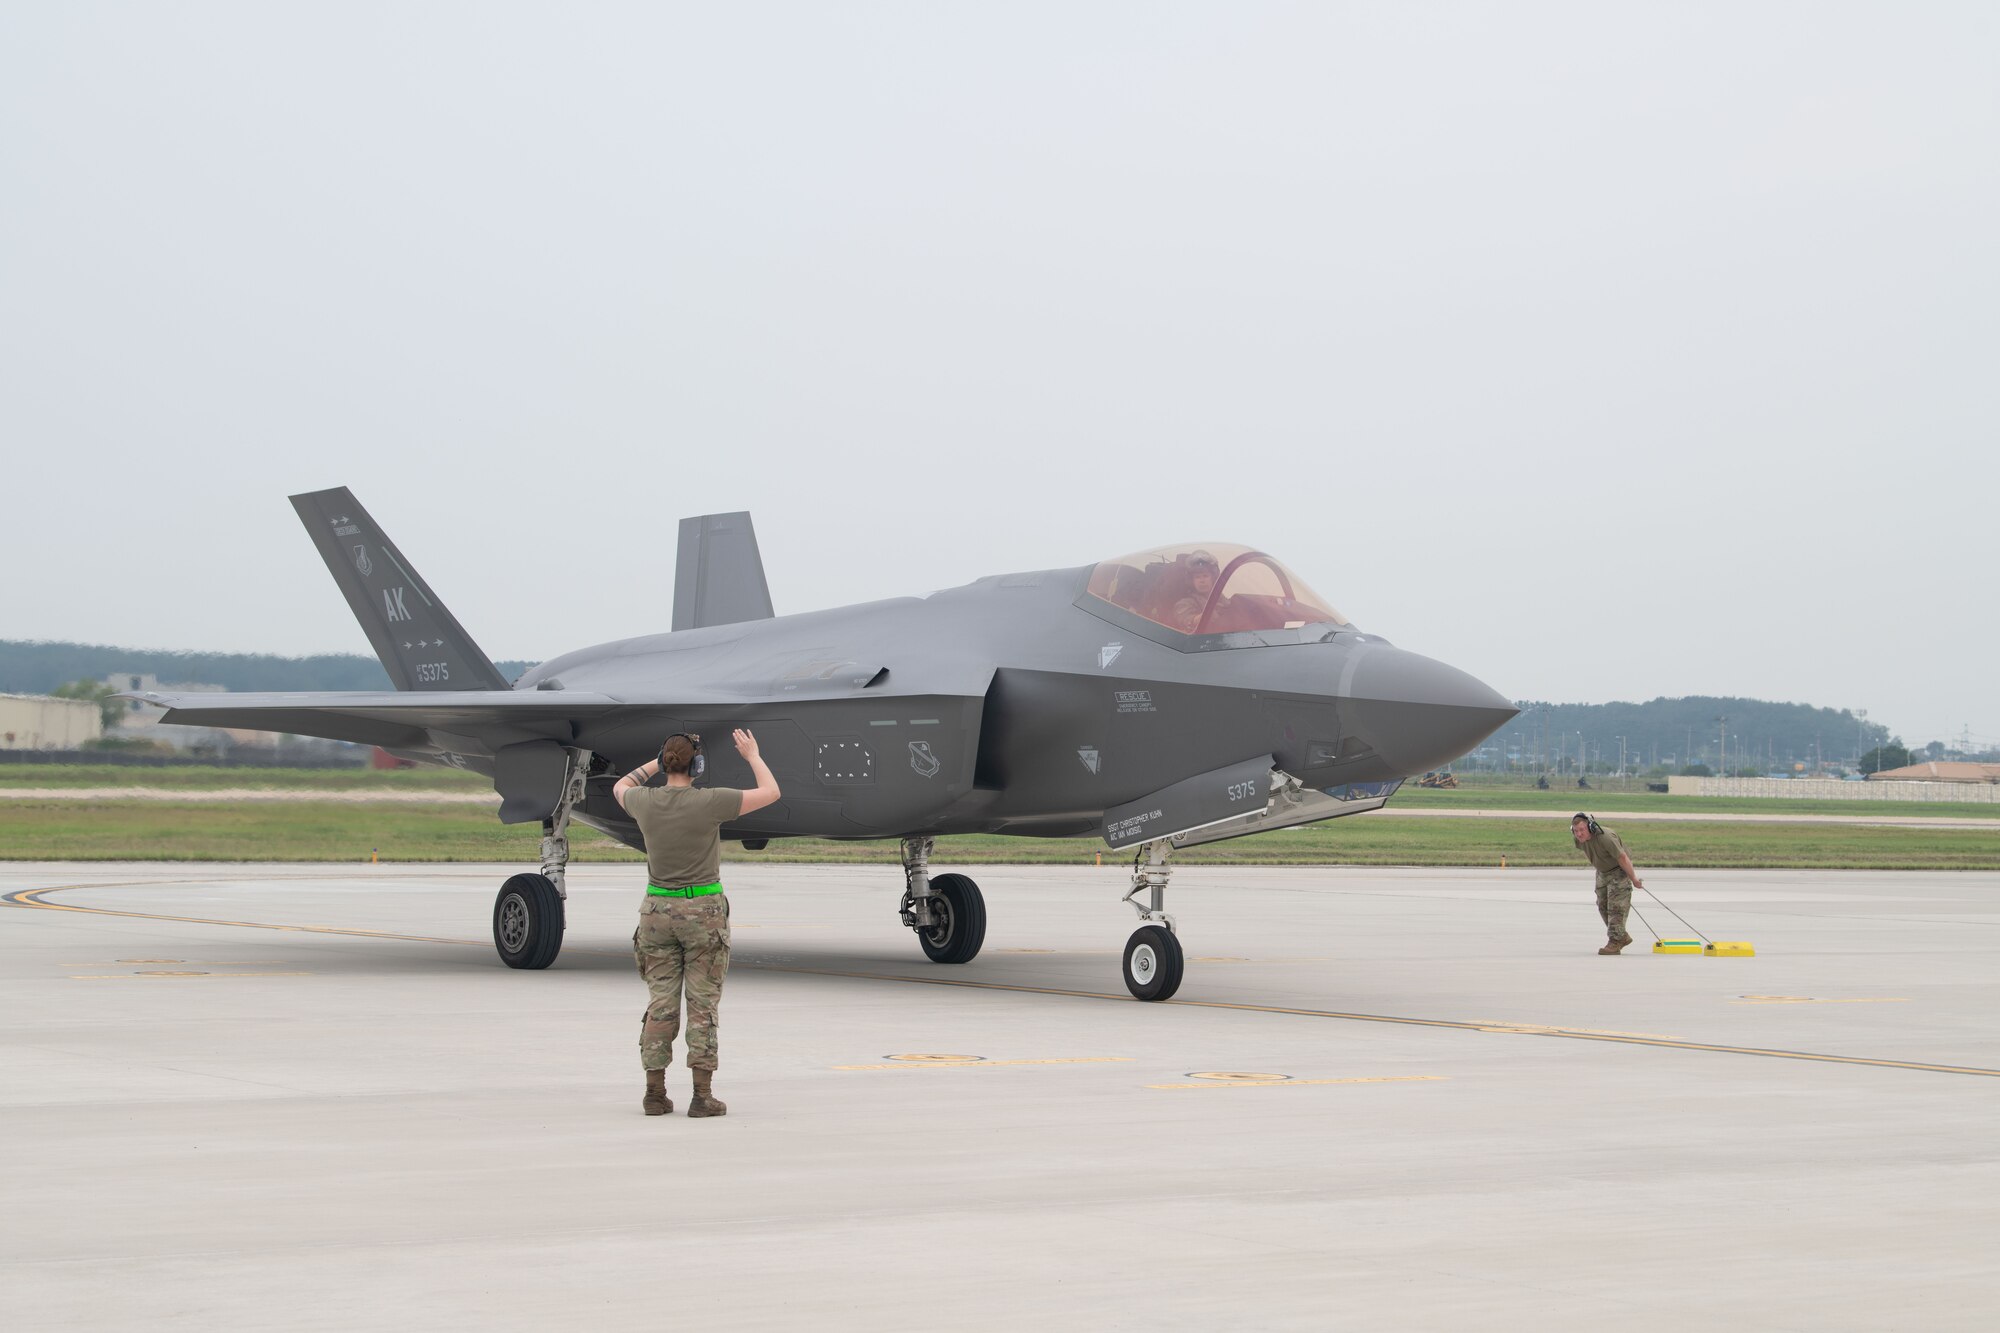 On July 5, United States Air Force F-35 aircraft from Eielson Air Force Base, Alaska arrive in the Republic of Korea to conduct flight operations alongside their ROK Air Force counterparts. Photo by U.S. Air Force.